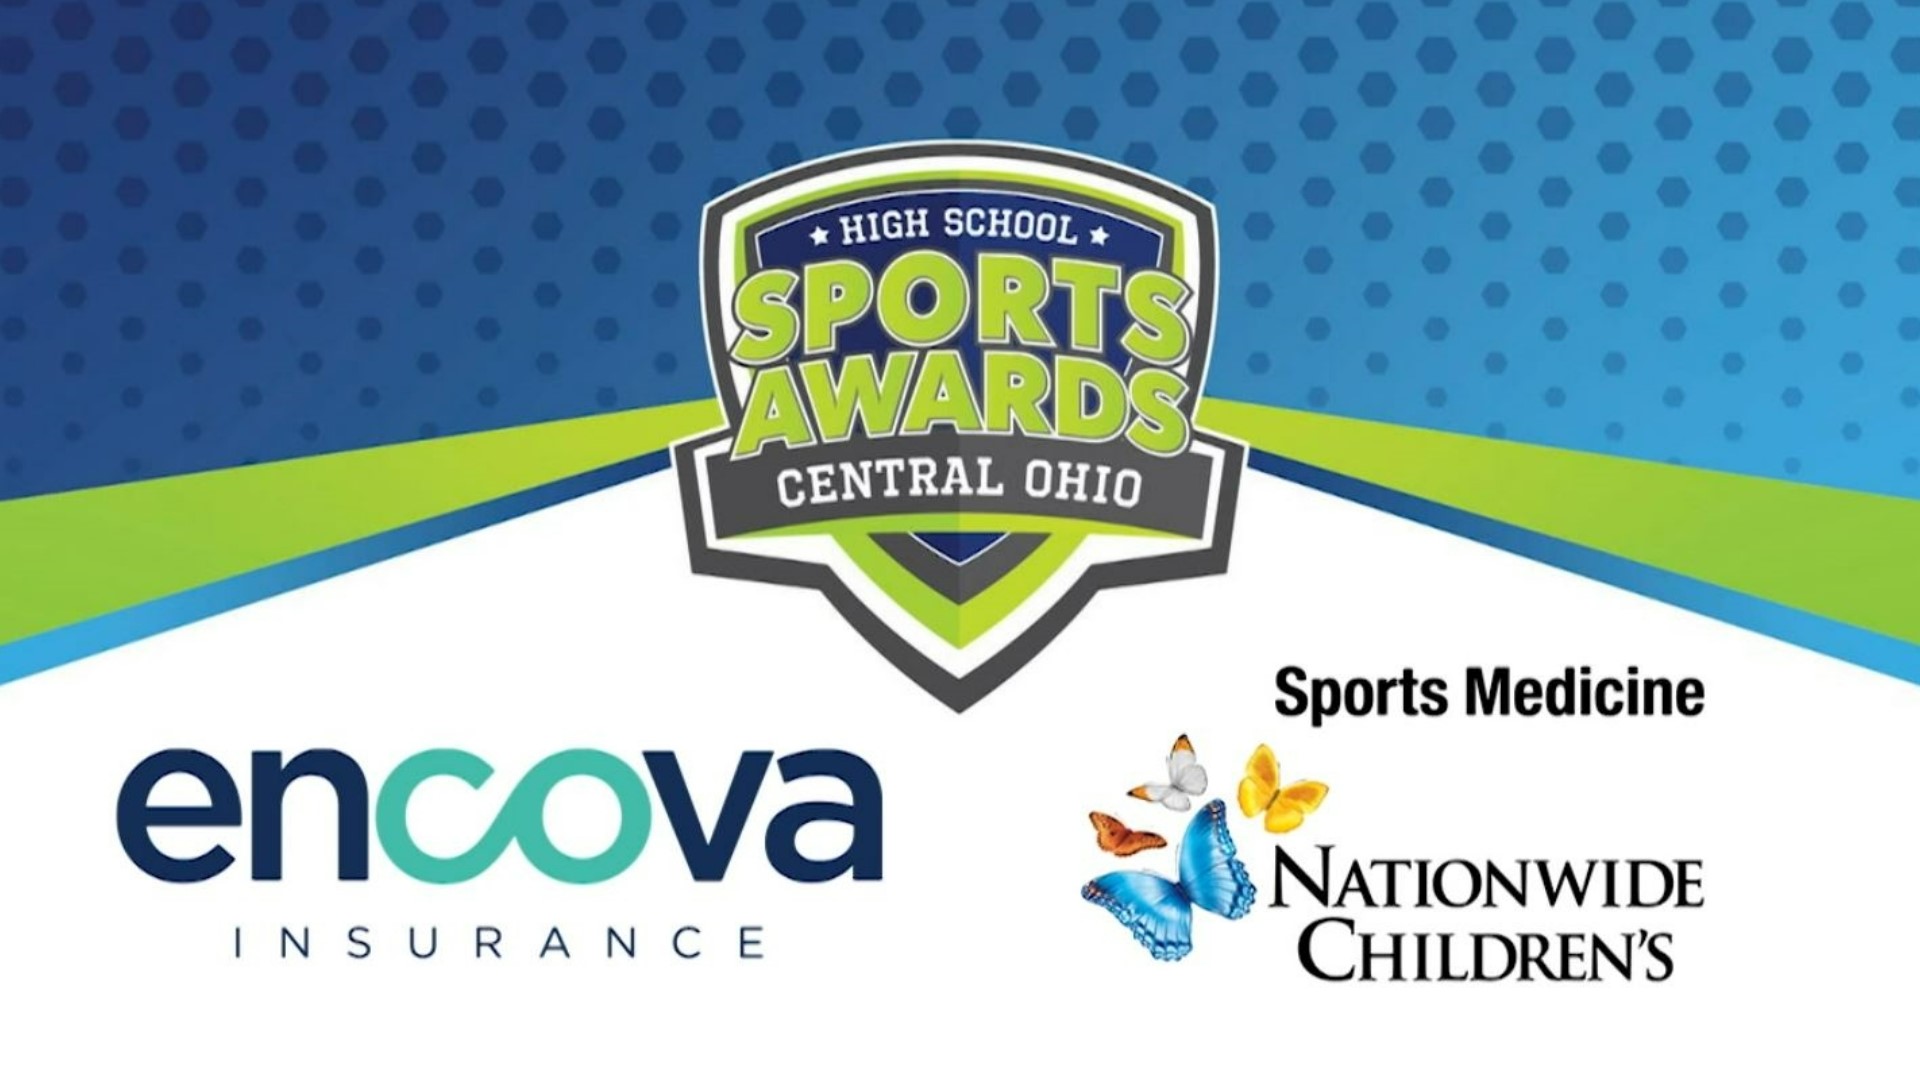 The Central Ohio High School Sports Awards presented by Encova Insurance is an annual high school athlete recognition program honoring athletes, coaches, and teams.